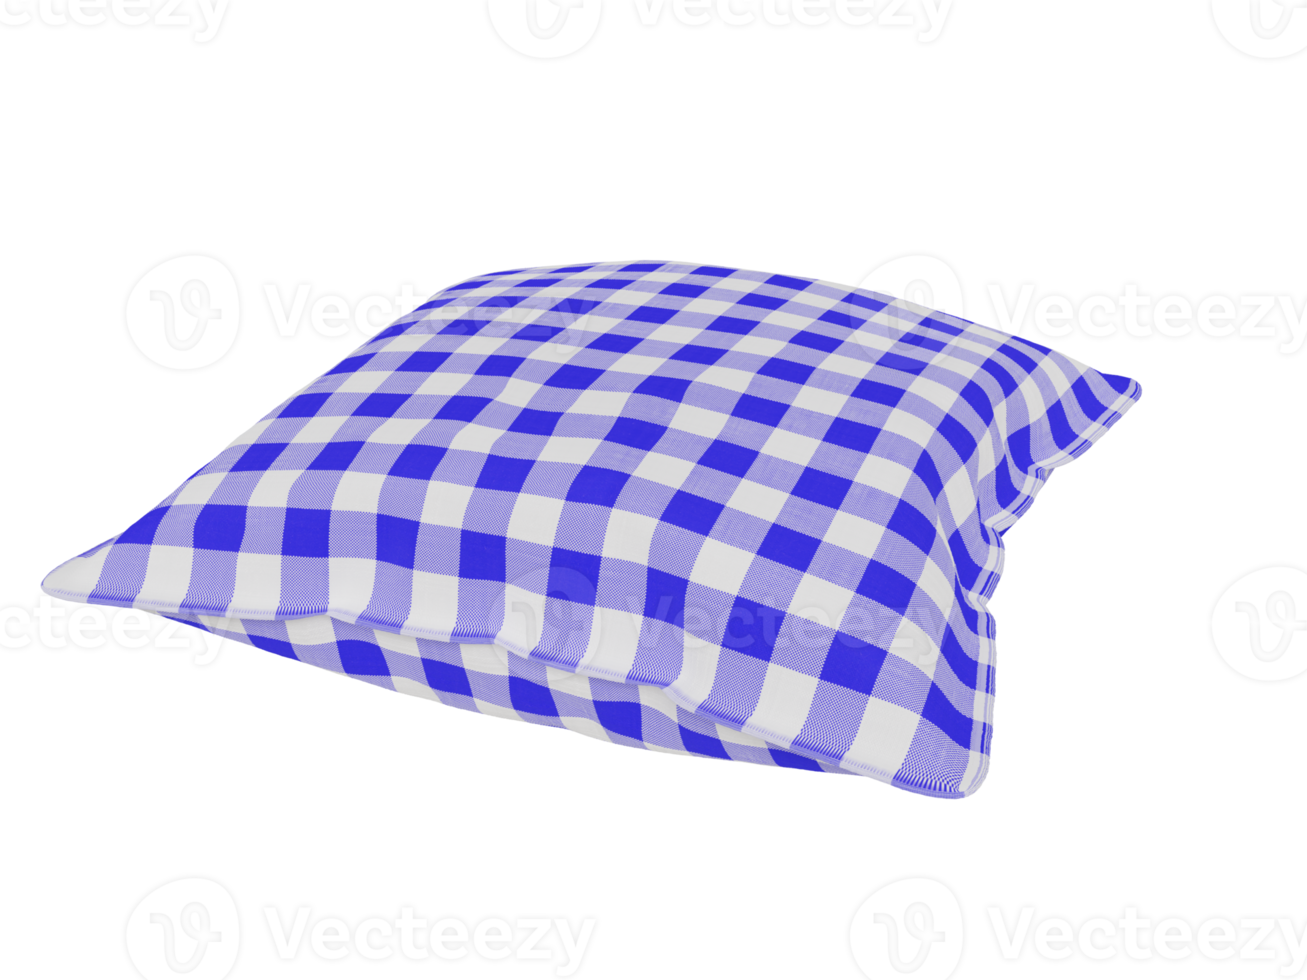 Checkered realistic pillow. 3d render png